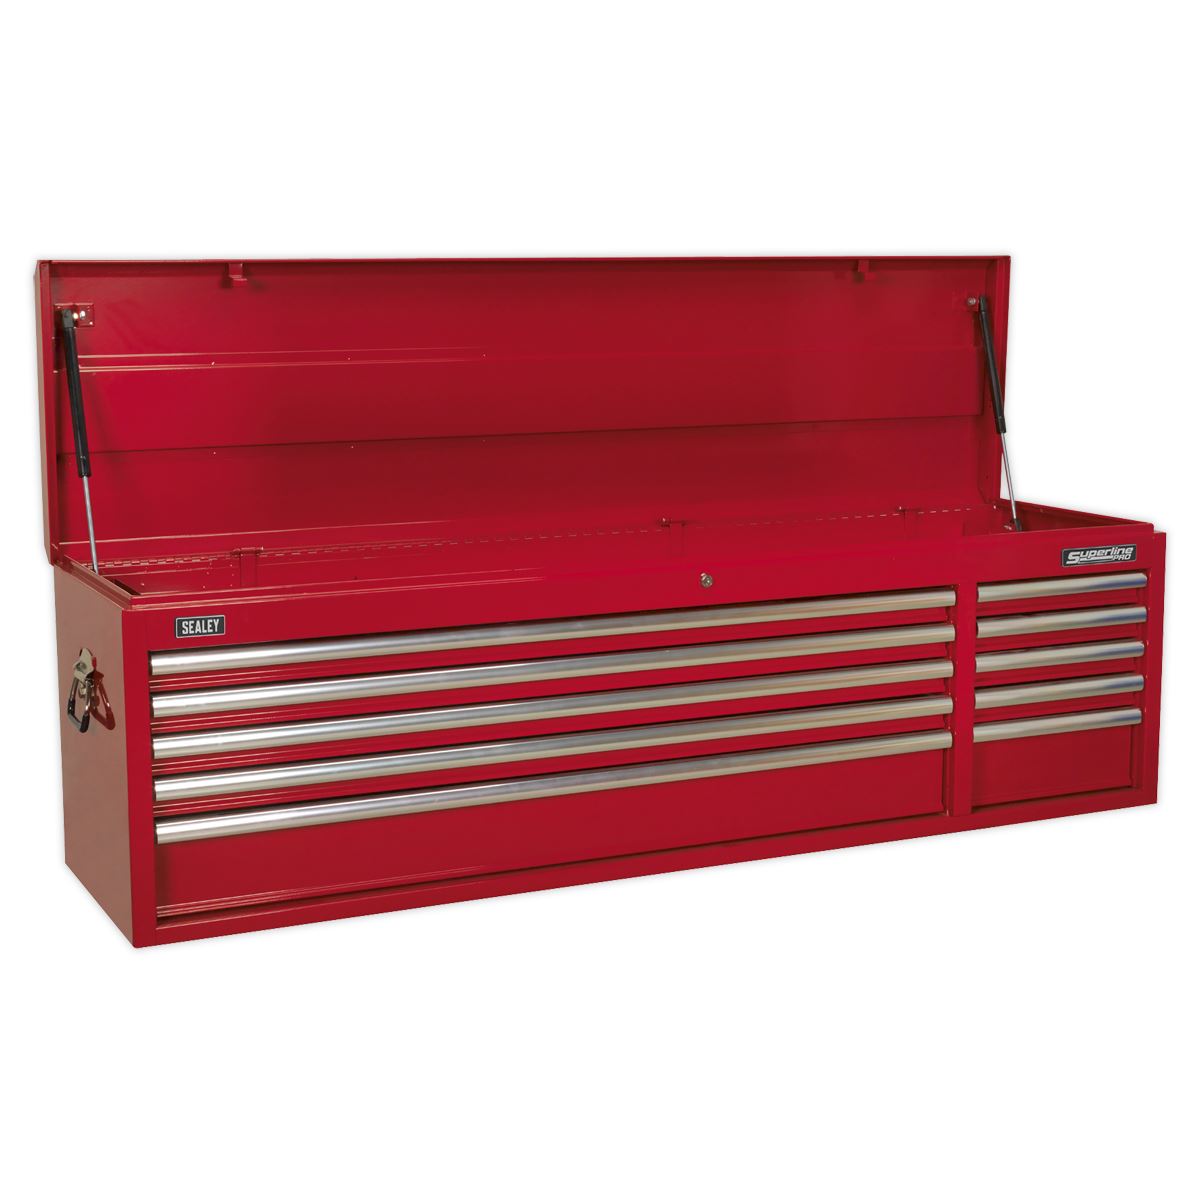 Sealey Superline Pro Topchest 10 Drawer with Ball-Bearing Slides Heavy-Duty - Red